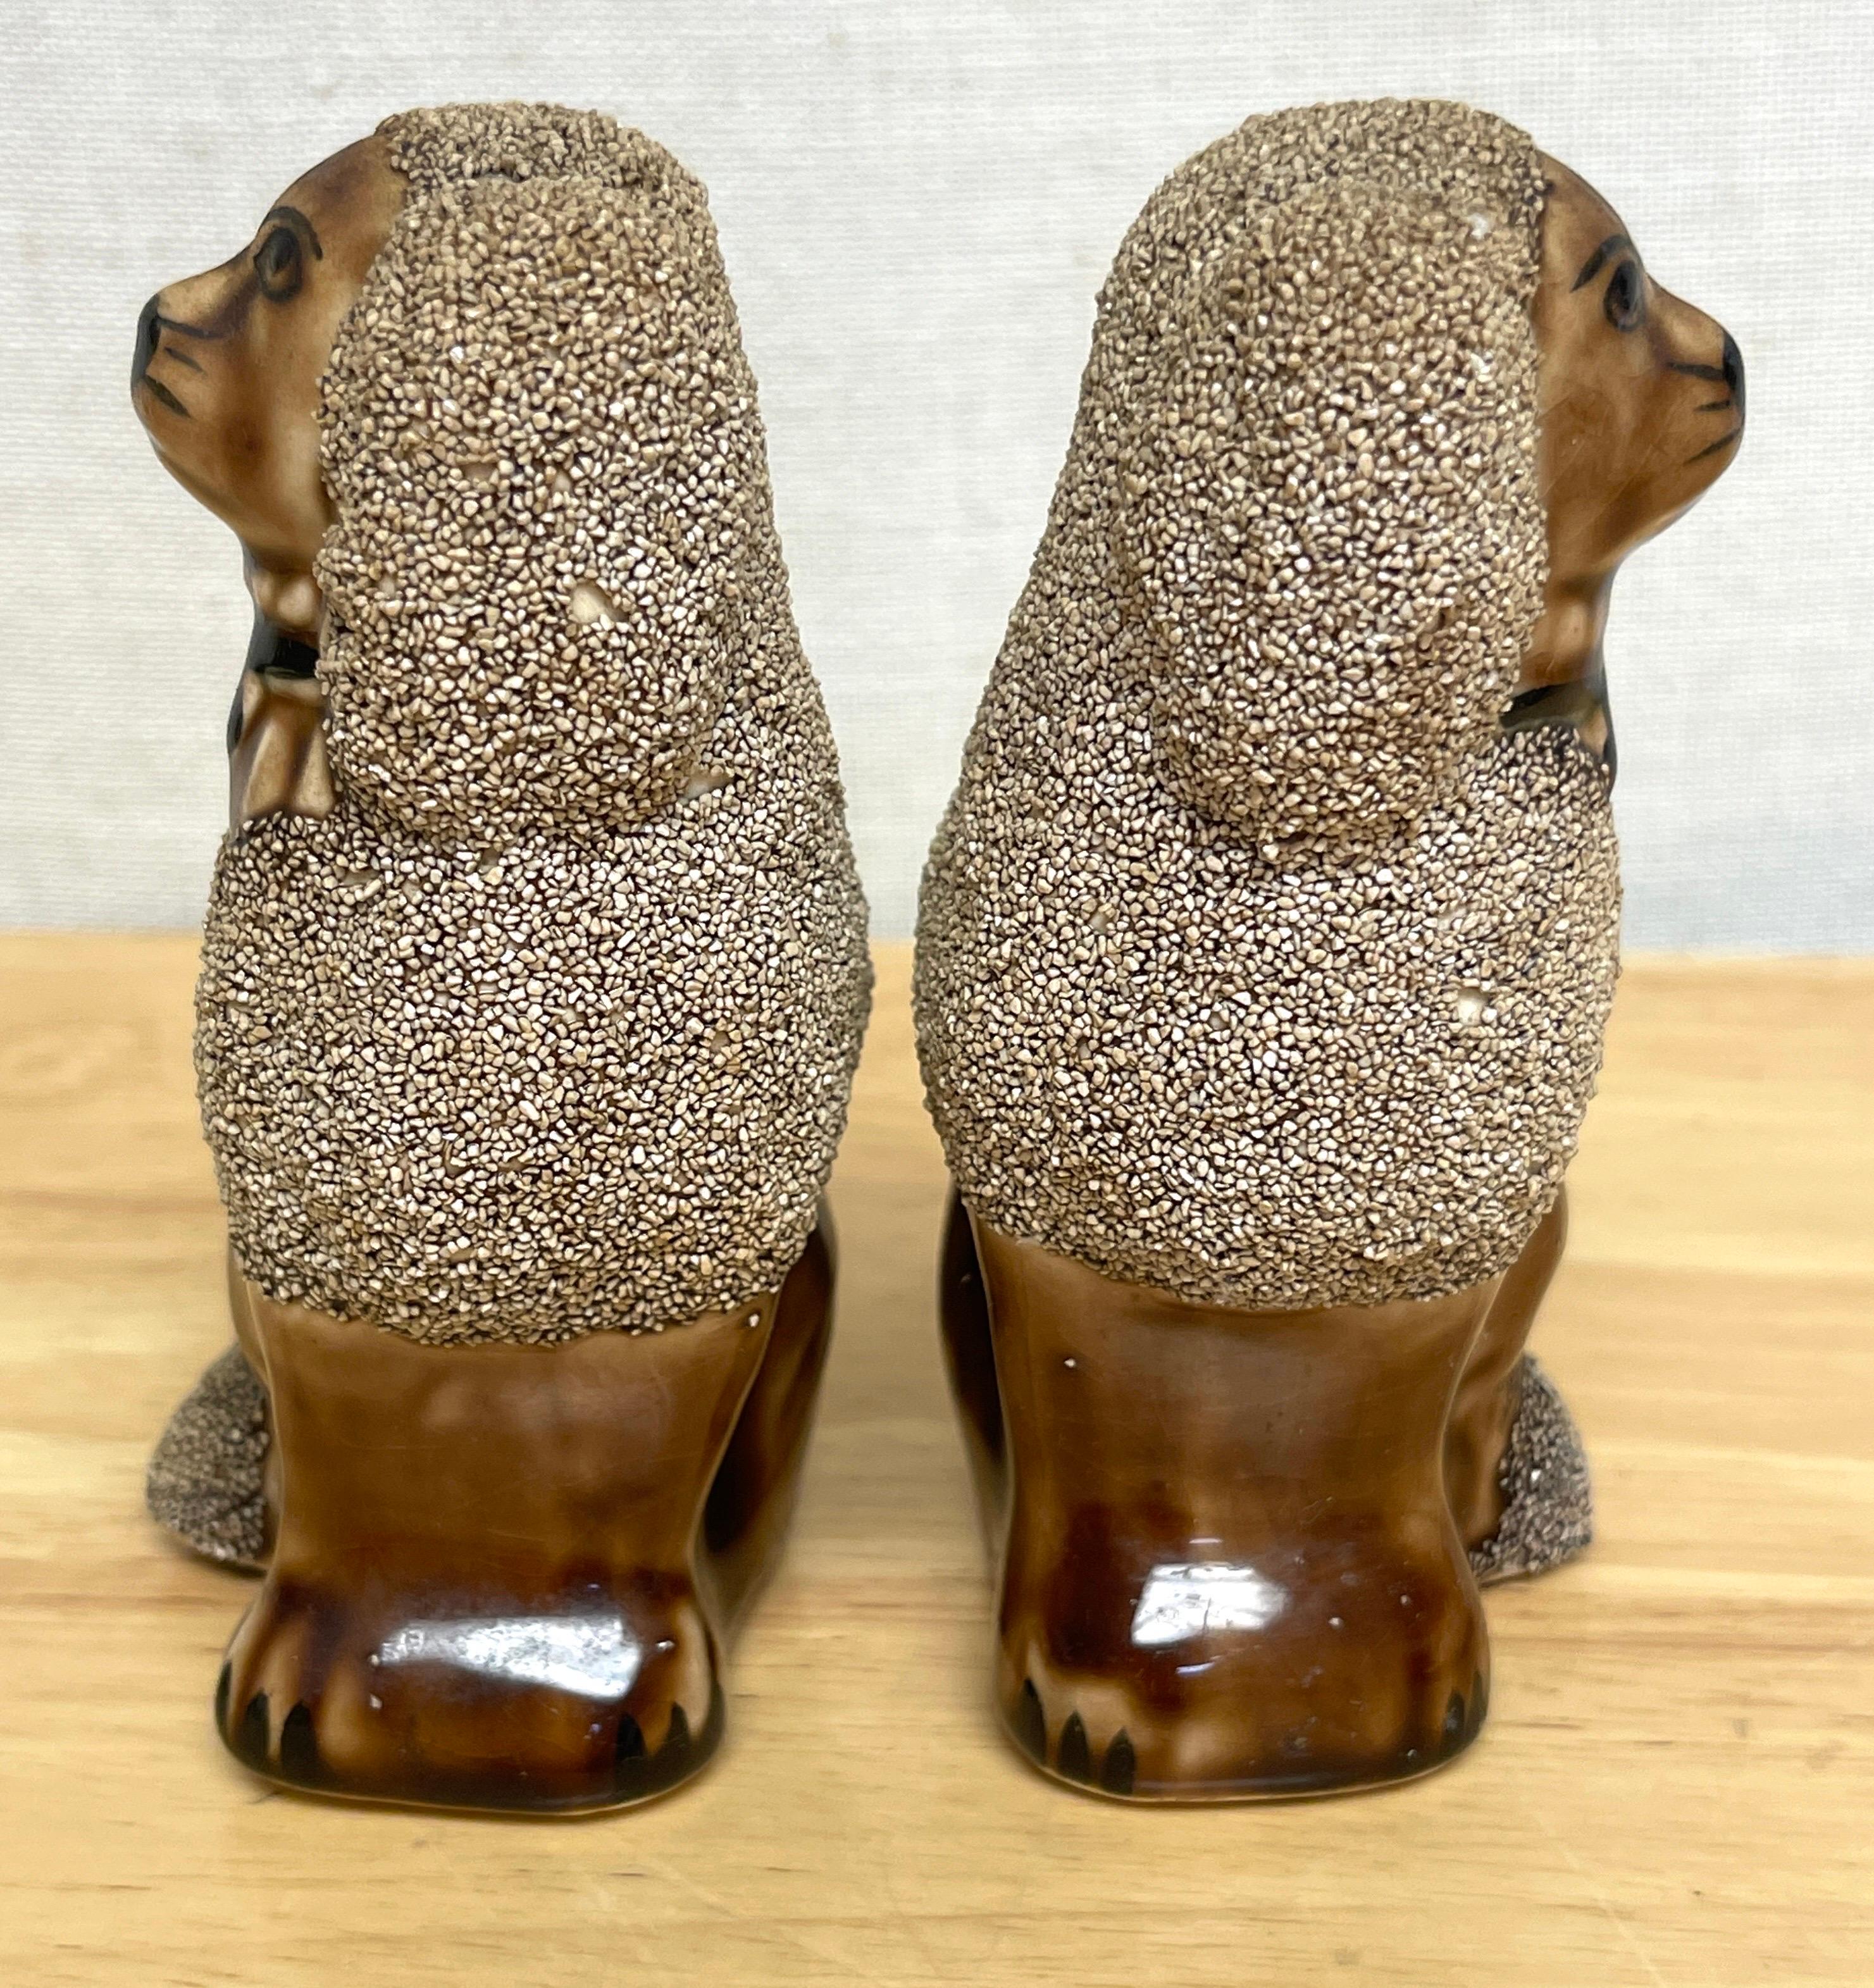 Pair of Diminutive Bennington Style Rockingham-Glazed Figures of Seated Poodles In Good Condition For Sale In West Palm Beach, FL